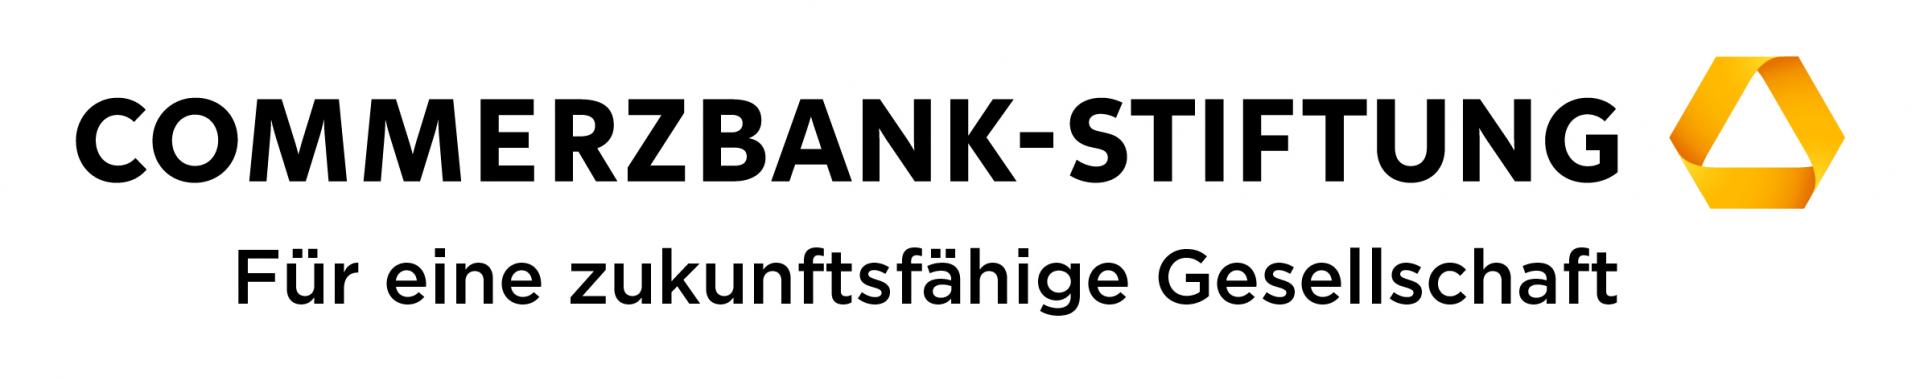 Commerzbank-Stiftung